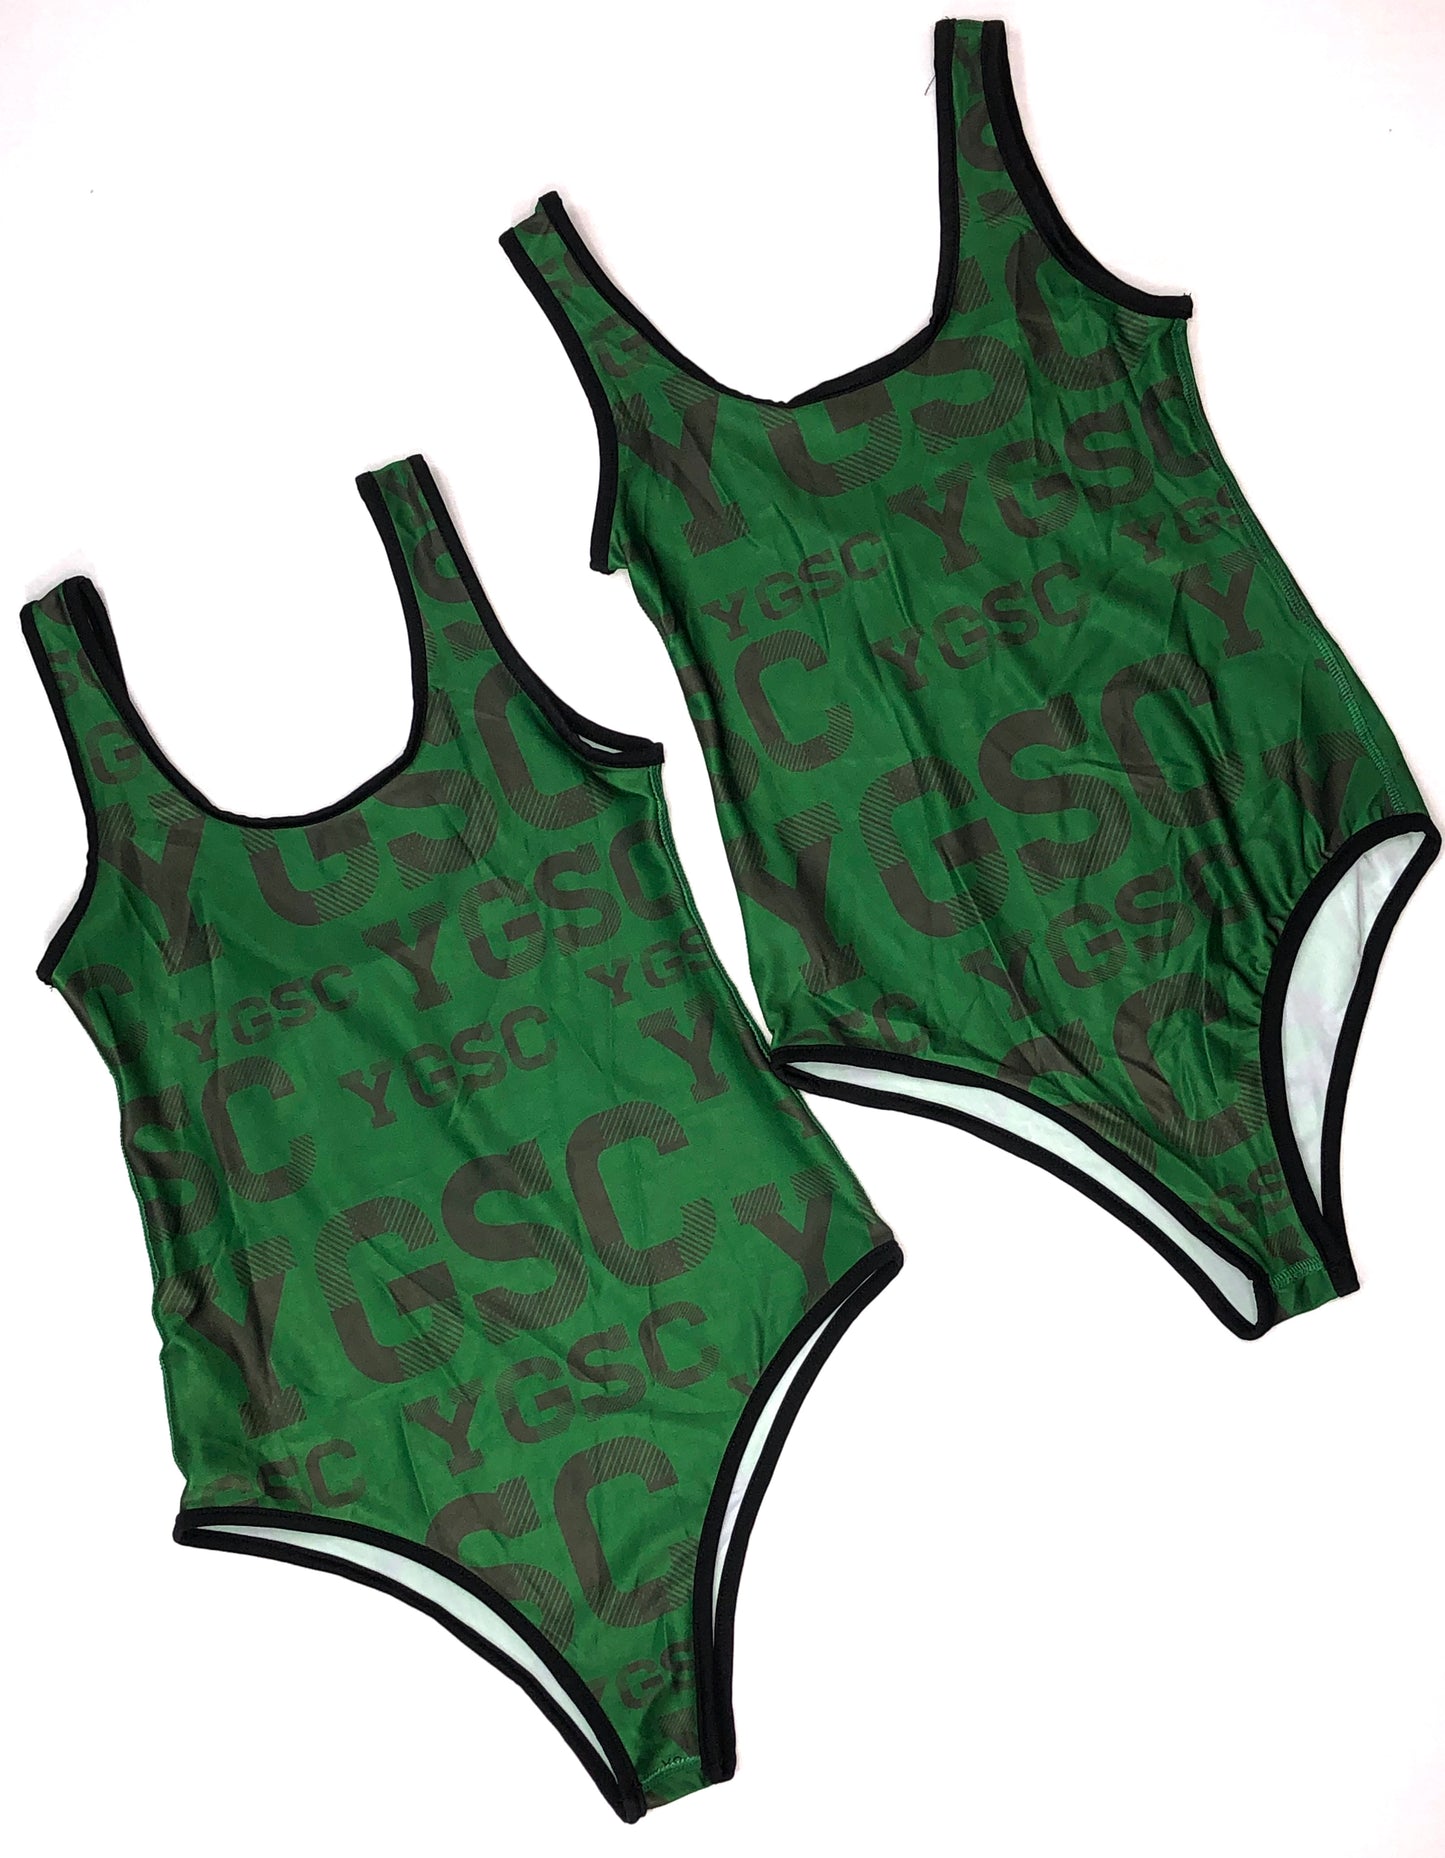 Female YGSC All Over Printed SwimSuit